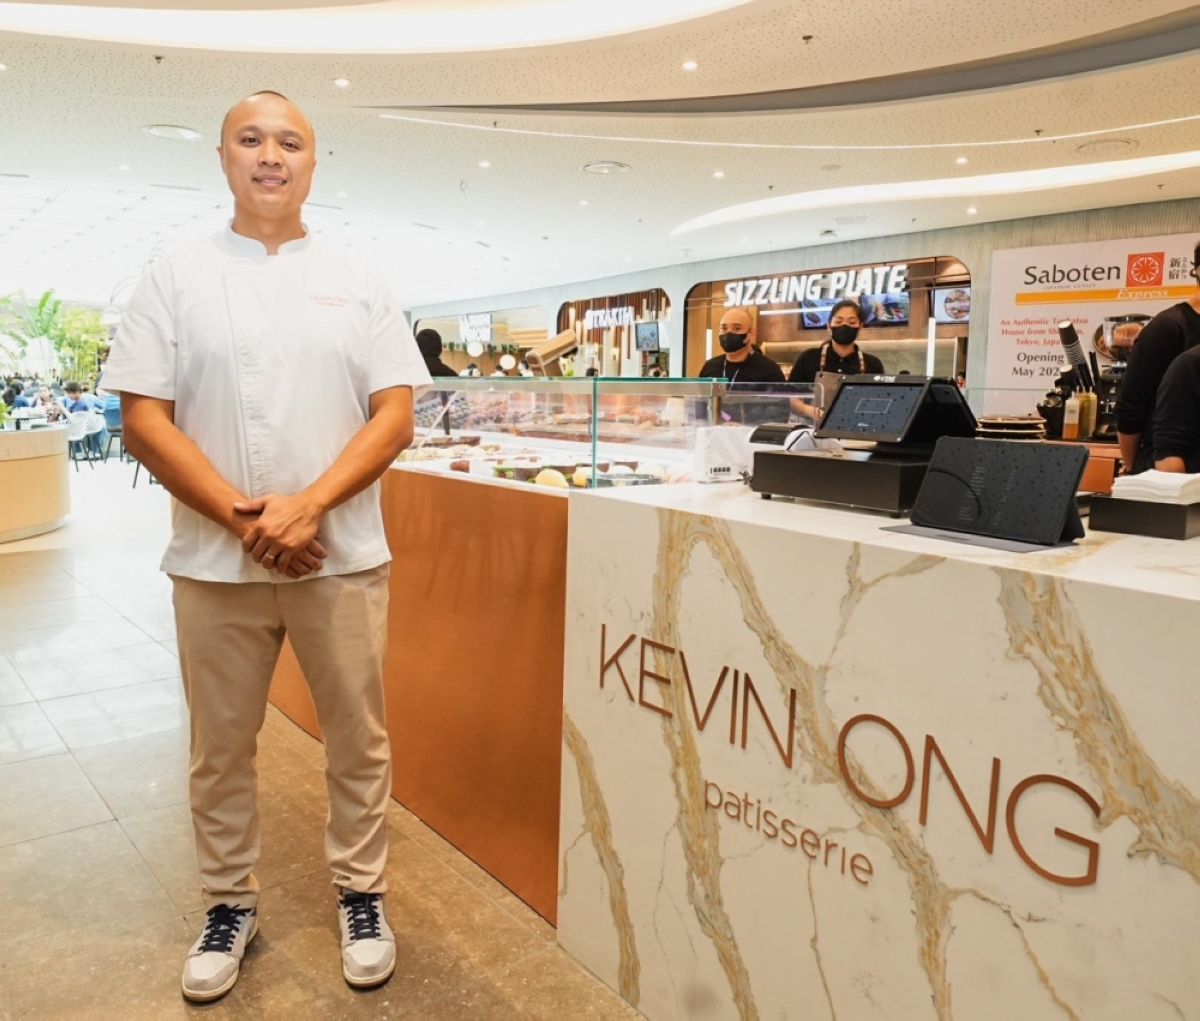 Pastry Chef Kevin Ong of Kevin Ong Patisserie is celebrated for his mastery of desserts like his elegant handcrafted bonbons